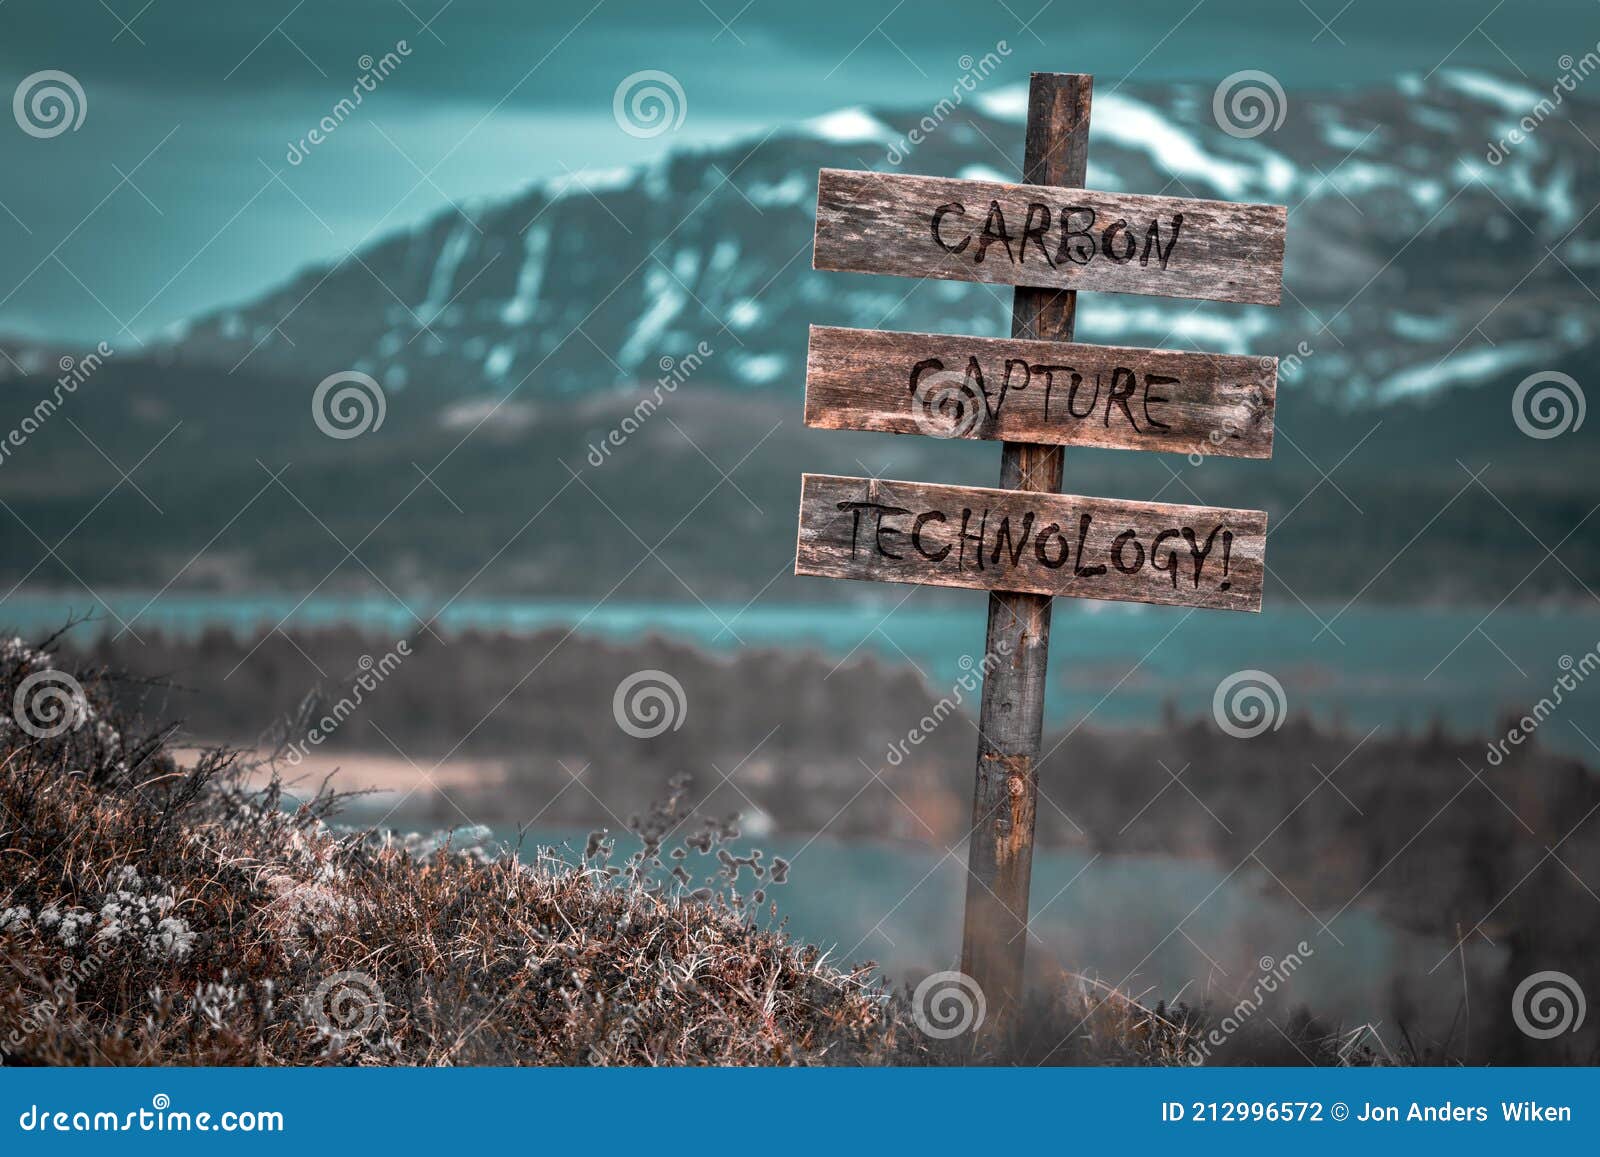 carbon capture technology text quote engraved on wooden signpost outdoors in landscape looking polluted